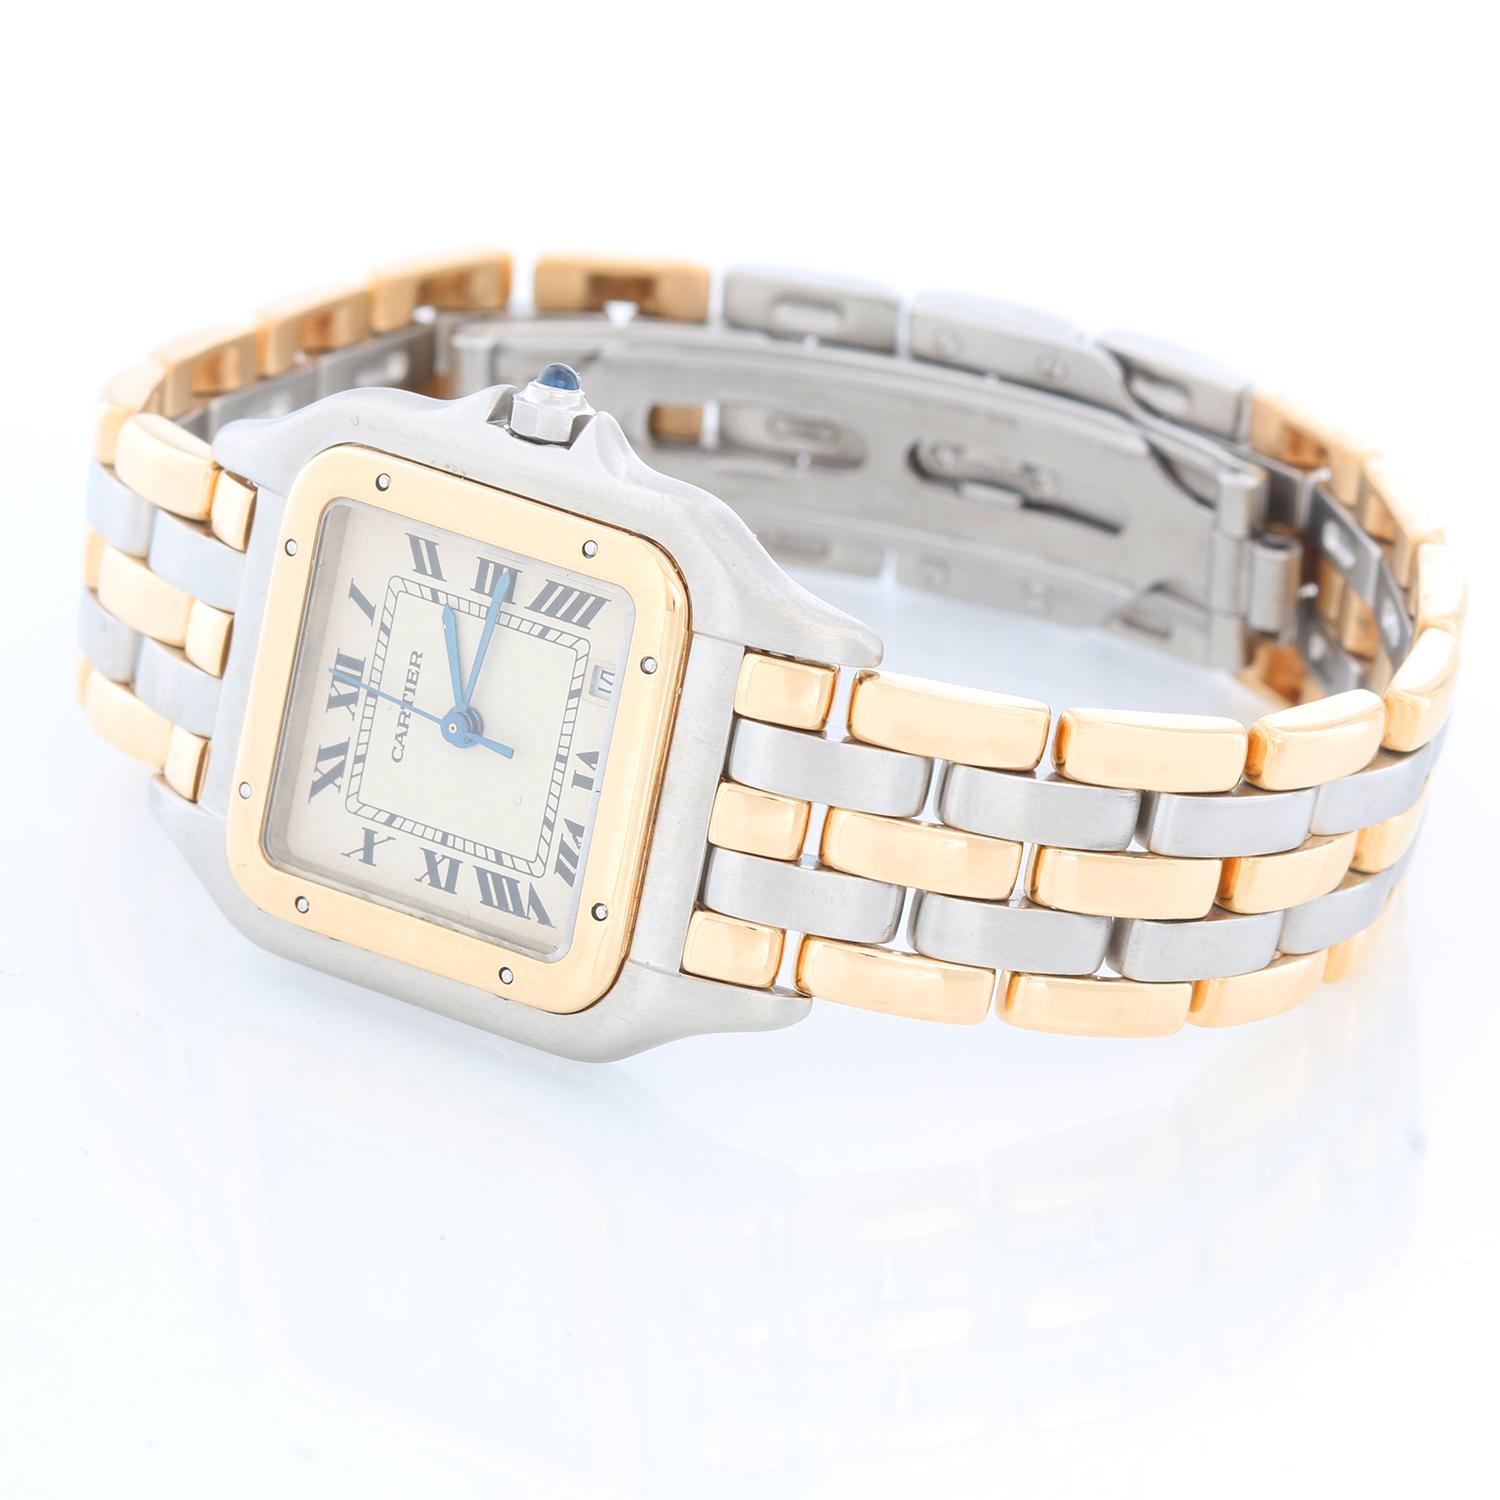 Cartier 3-Row Panther 2-Tone Steel & Gold Watch - Quartz. Stainless steel case with 18k yellow gold bezel (27mm x 37mm). Ivory colored dial with black Roman numerals and date at 5 o'clock. Stainless steel and 18k yellow 3-row Cartier Panther